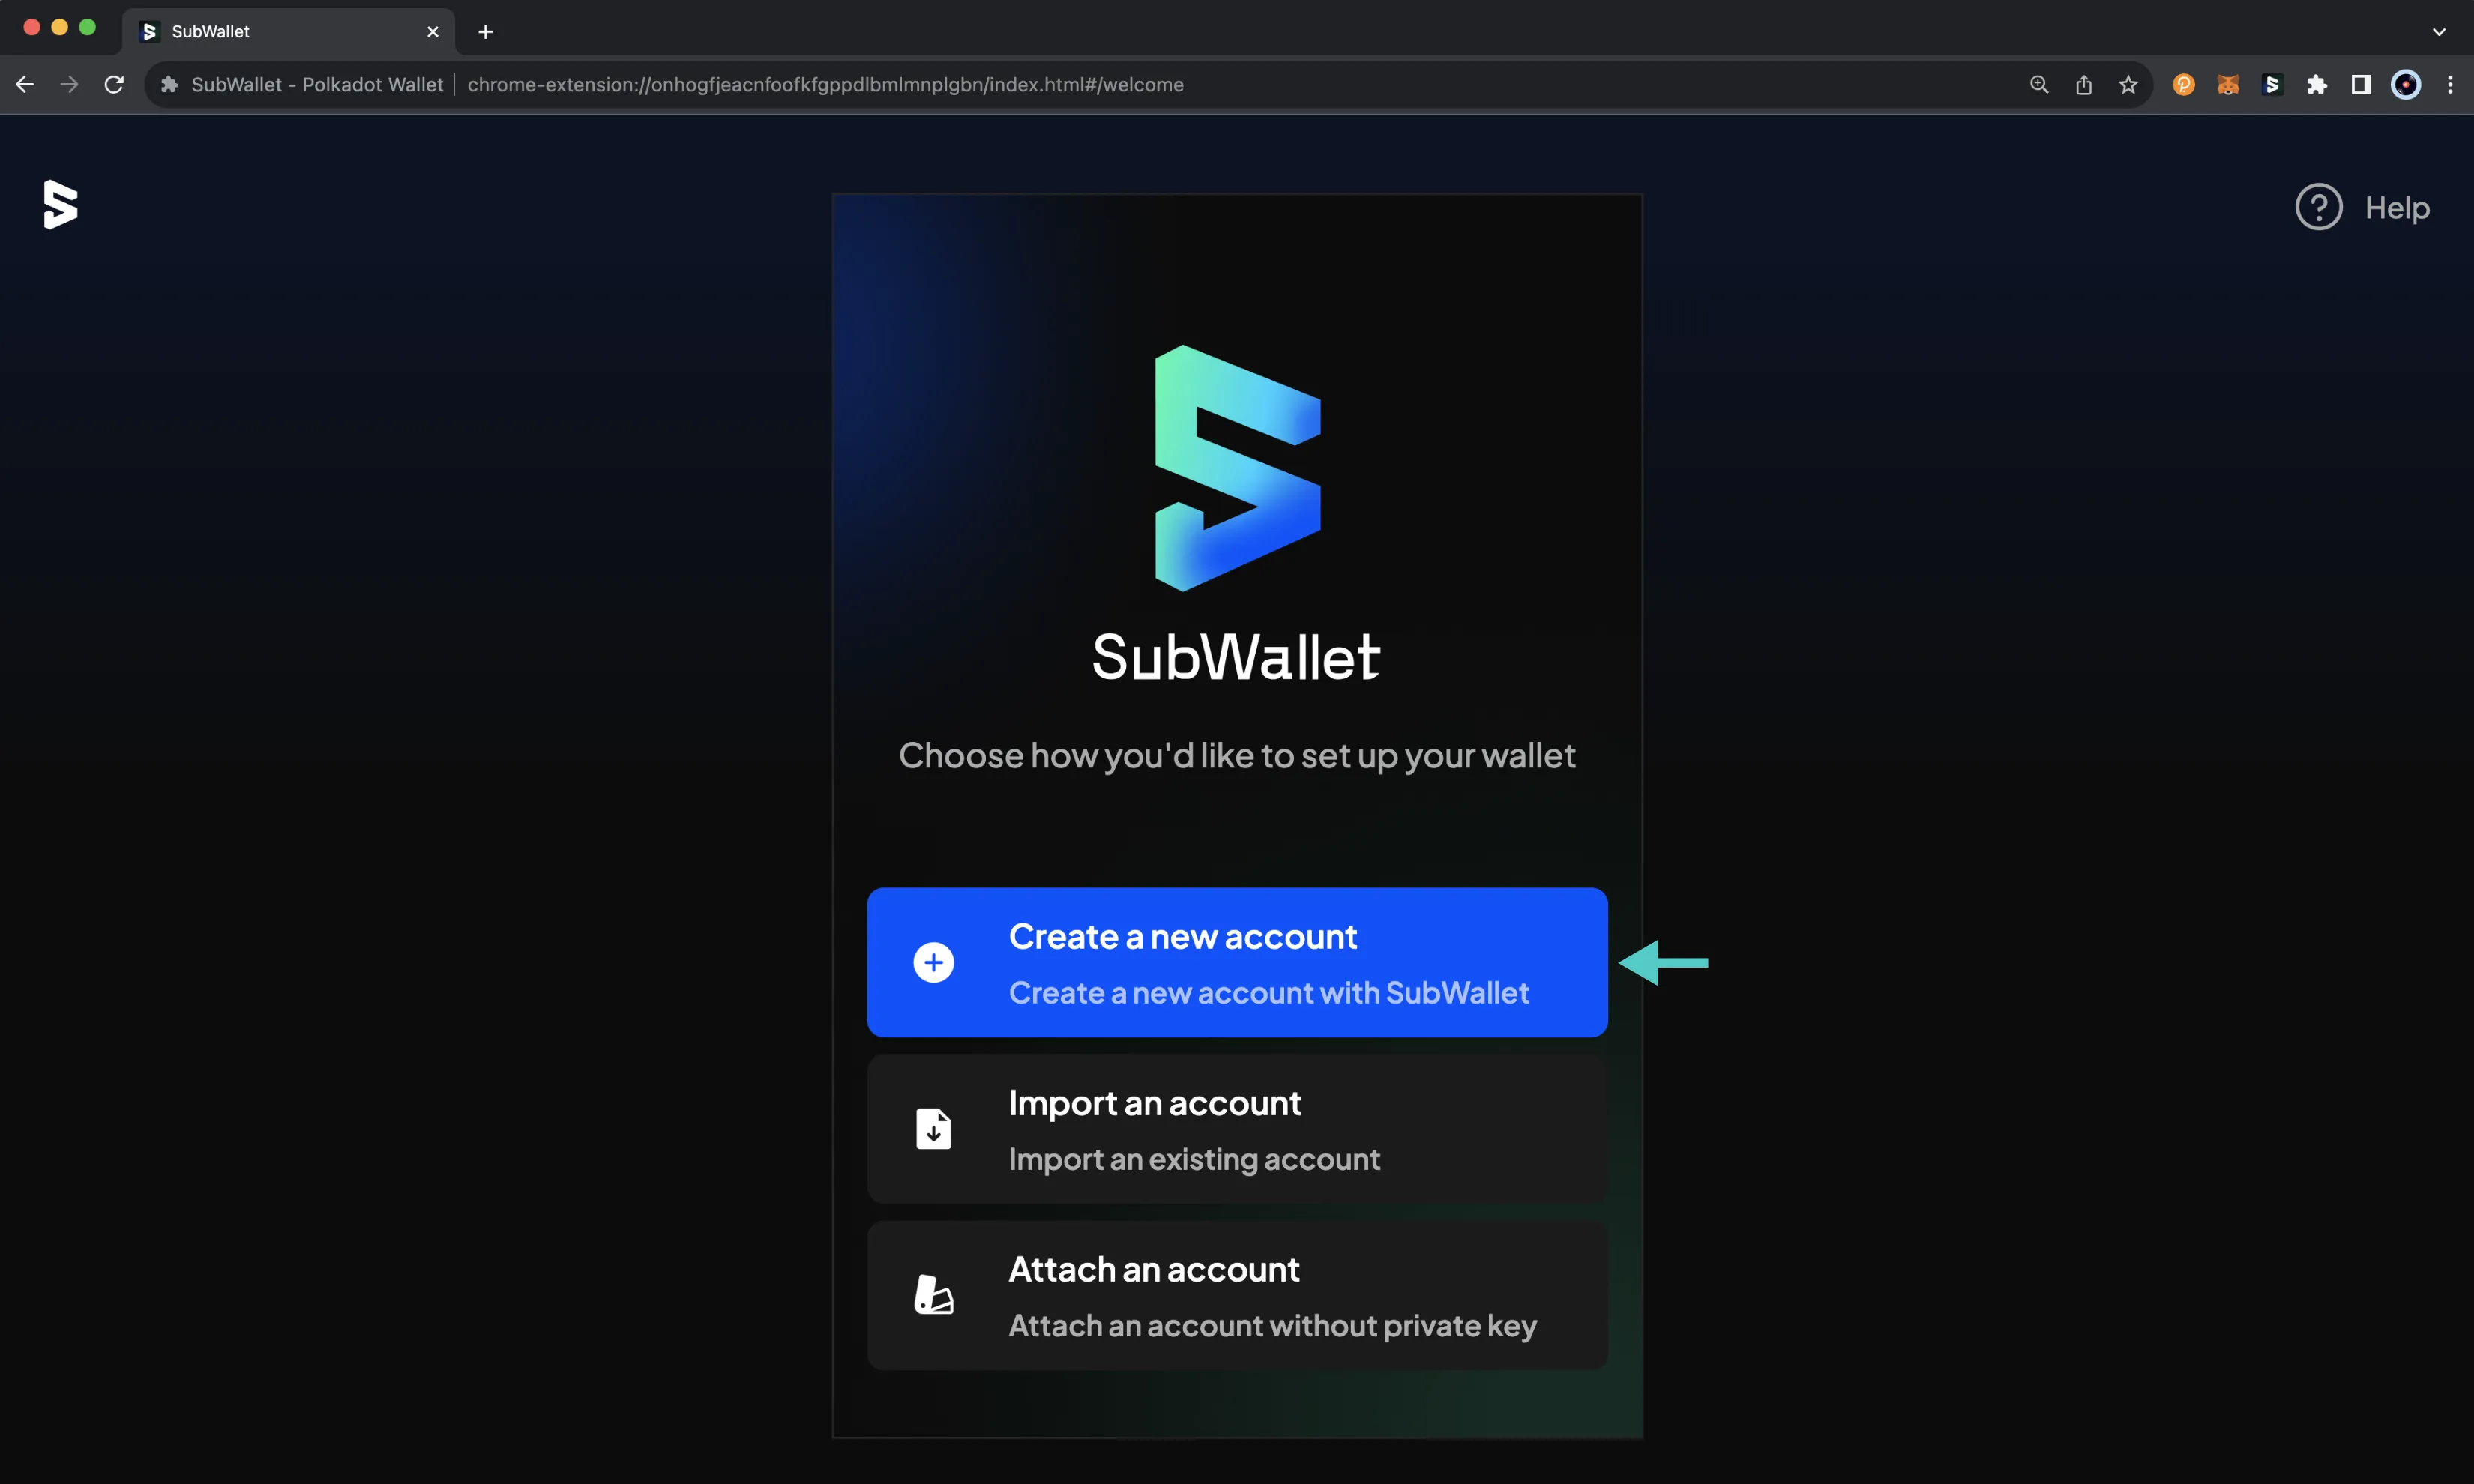 The main screen of the SubWallet browser extension.